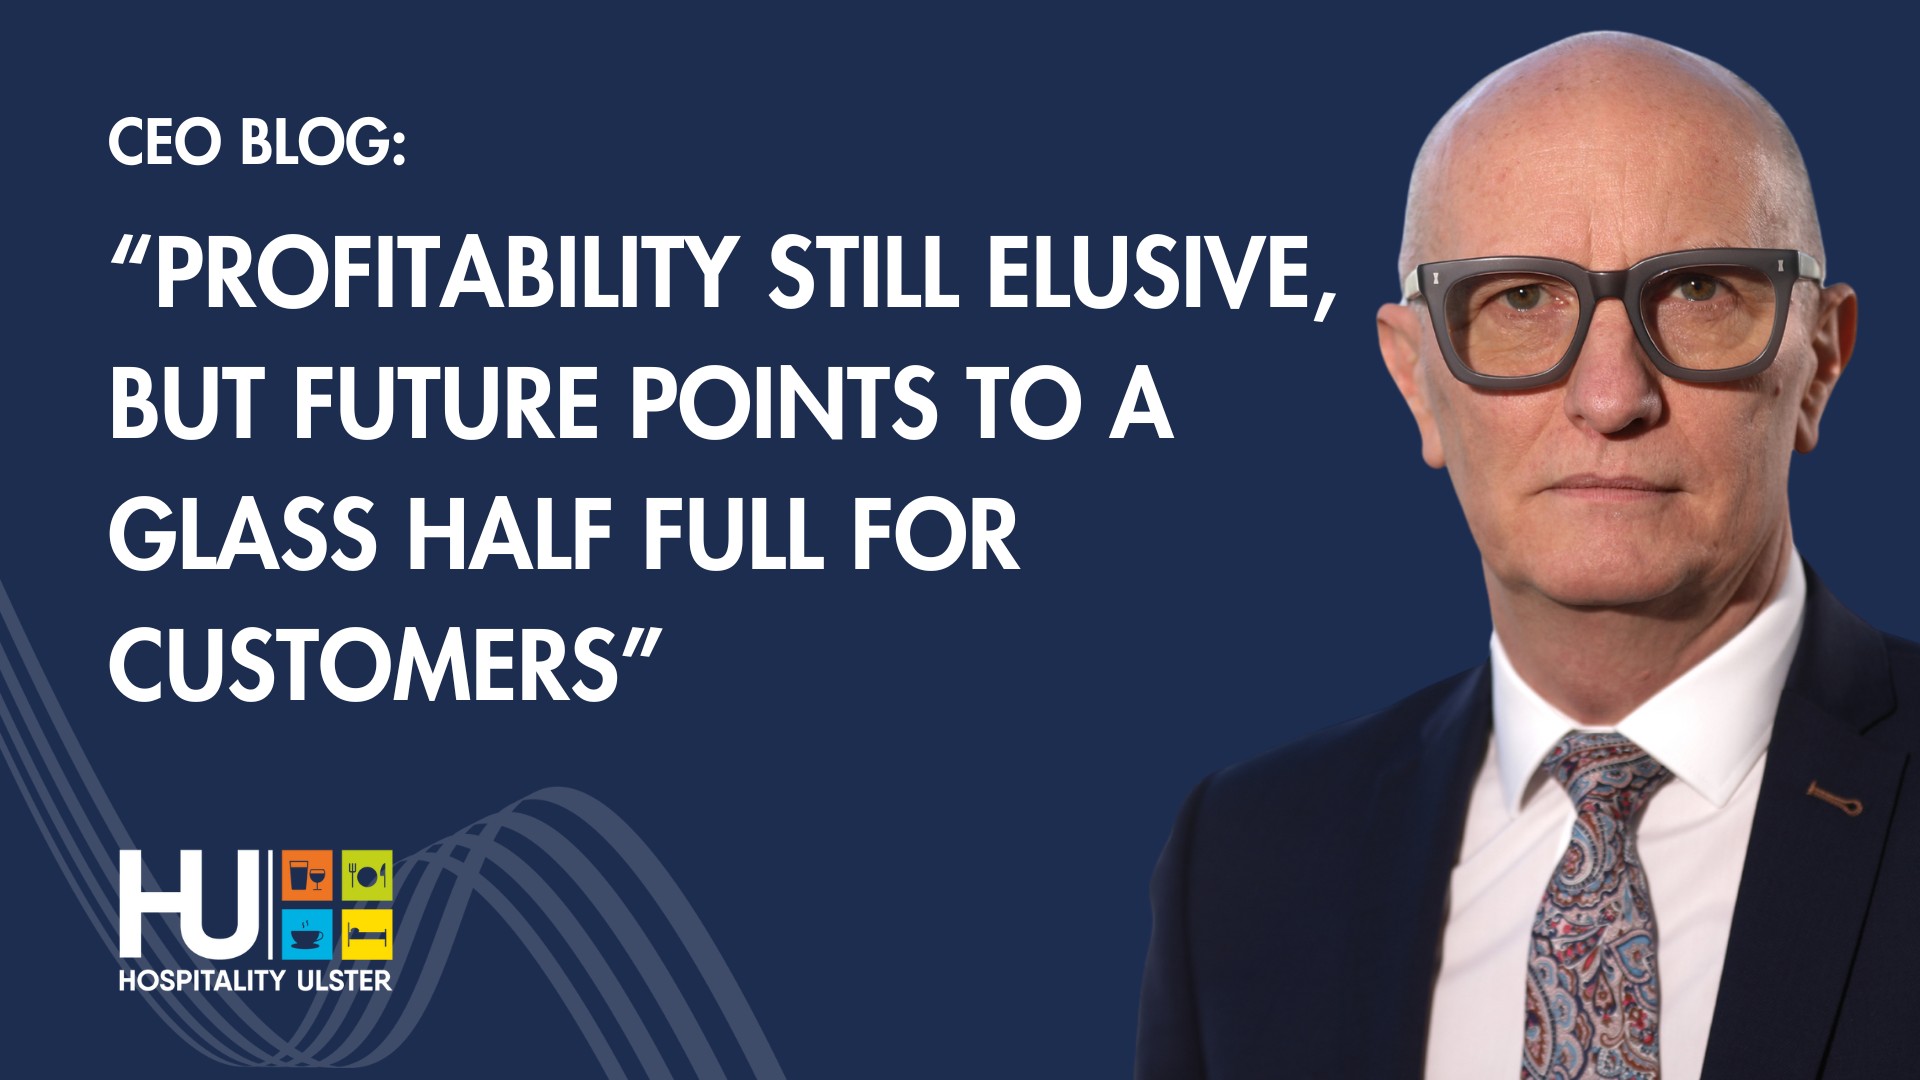 CEO BLOG - PROFITABILITY STILL ELUSIVE BUT FUTURE POINTS TO A GLASS HALF FULL FOR CUSTOMERS 